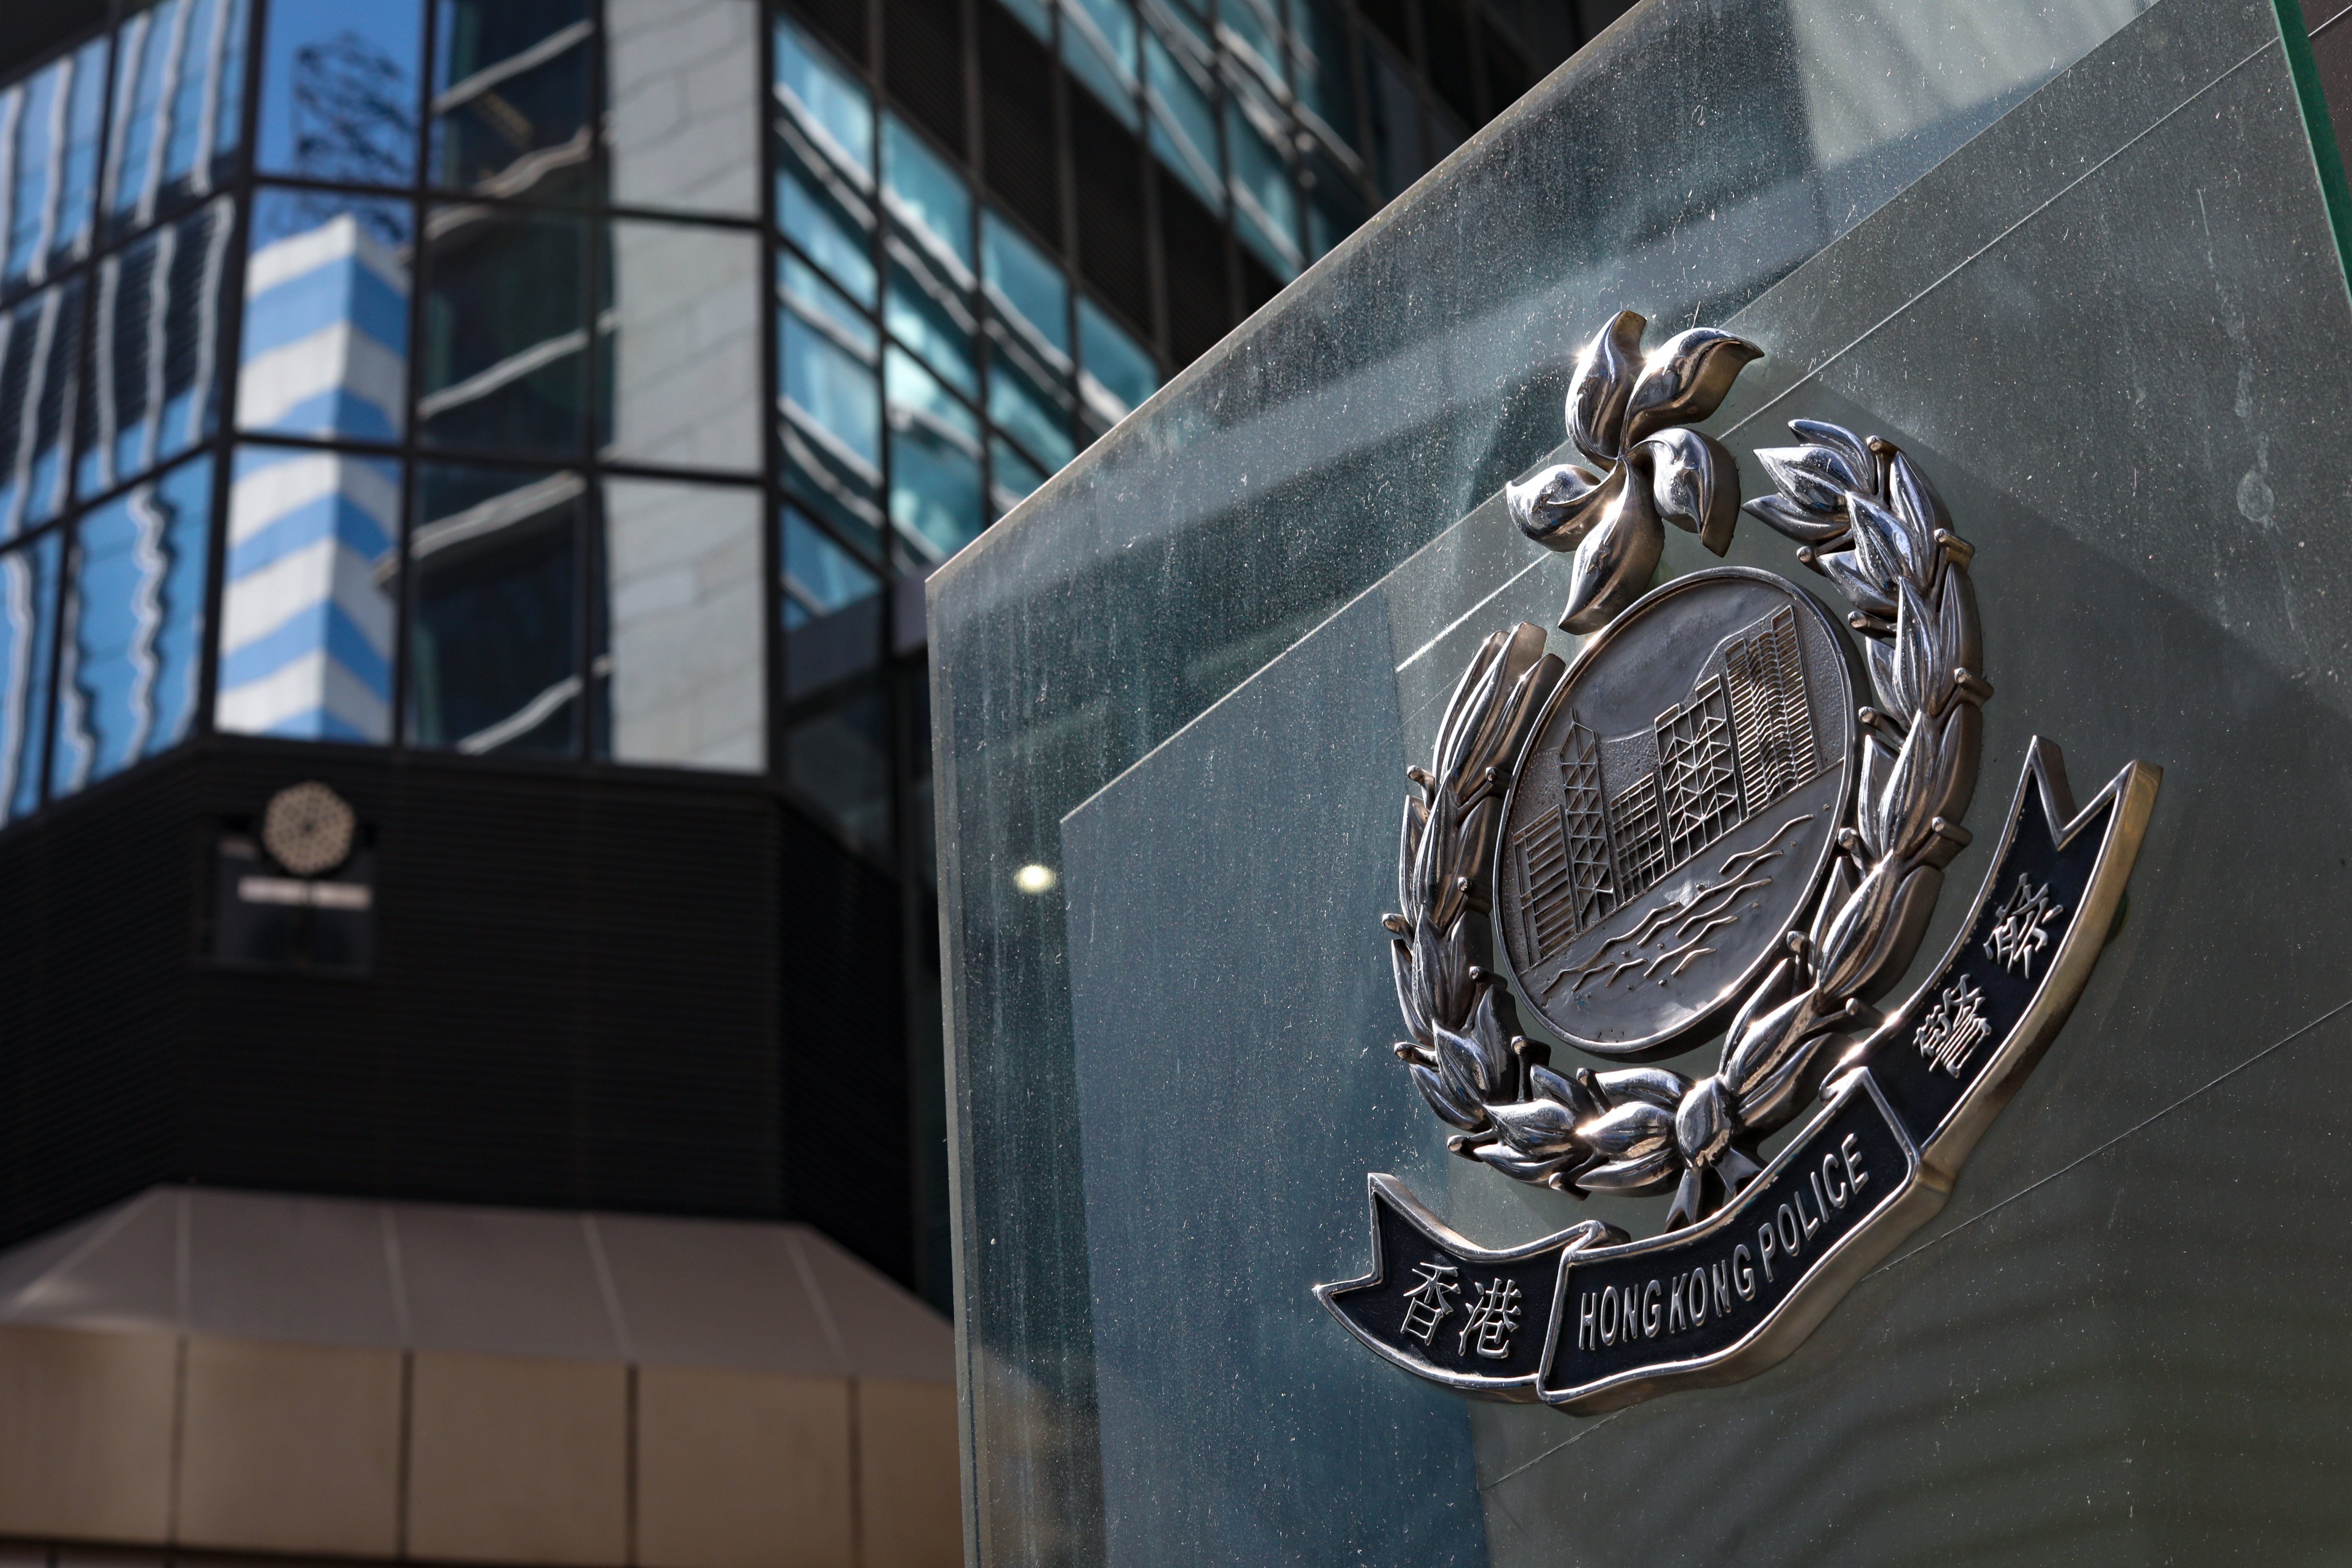 Police investigated after noticing a 30 per cent rise in the number of debt-related criminal damage and intimidation cases in two districts in the first two months of the year. Sun Yeung